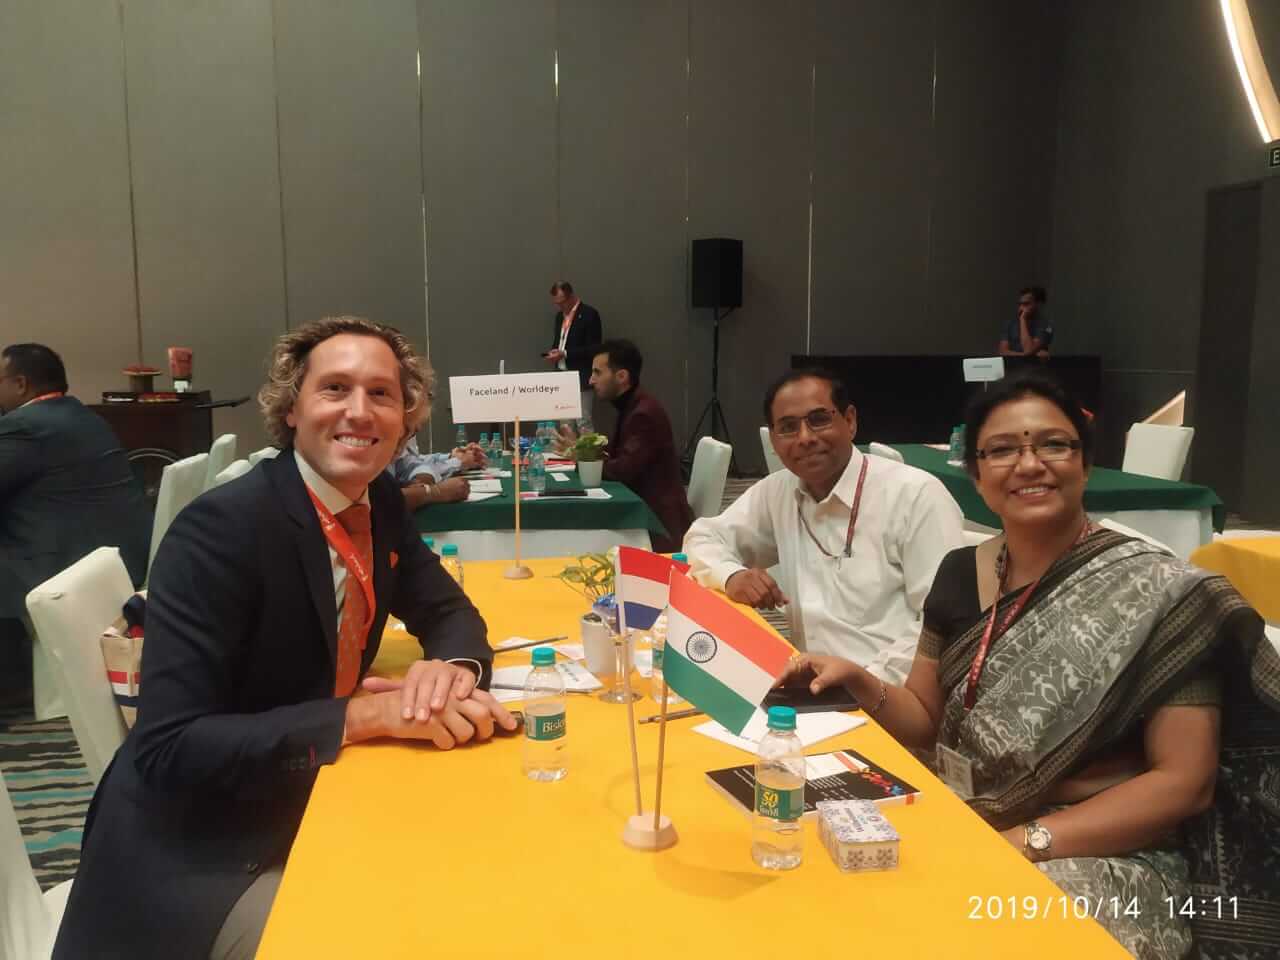 B2B meeting with Faceland representative Bart and AIIMS representatives at the summit organised by CII in collaboration with the Netherlands